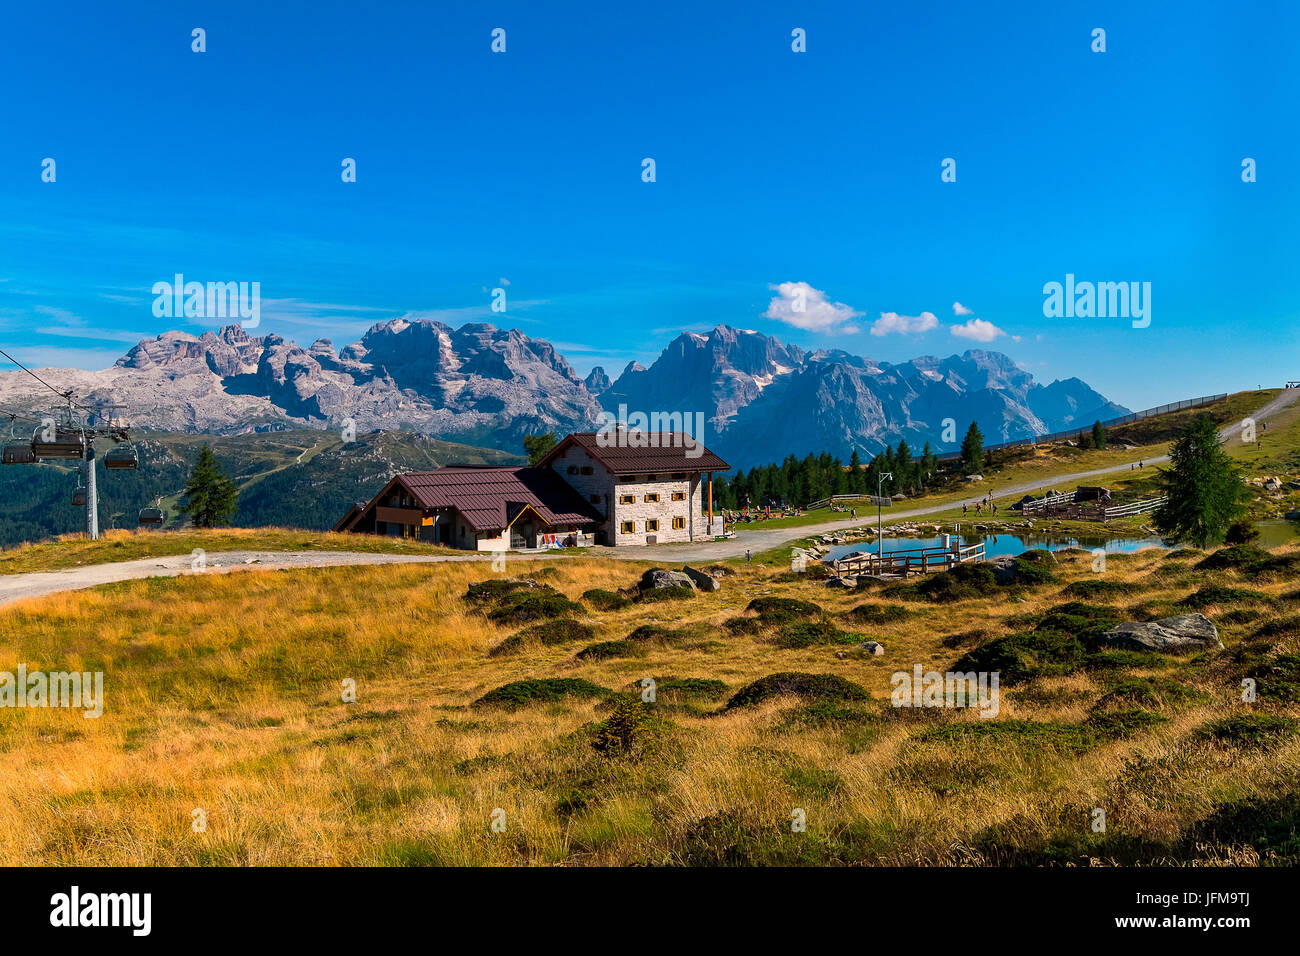 Madonna di Campiglio, Trento, Trantino Alto Adige, Italy The refuge Viviani Pradalago, with its pond, photographed from above, In the background you can see the dolomite of the Brenta, on the right the chairlift Winter Stock Photo